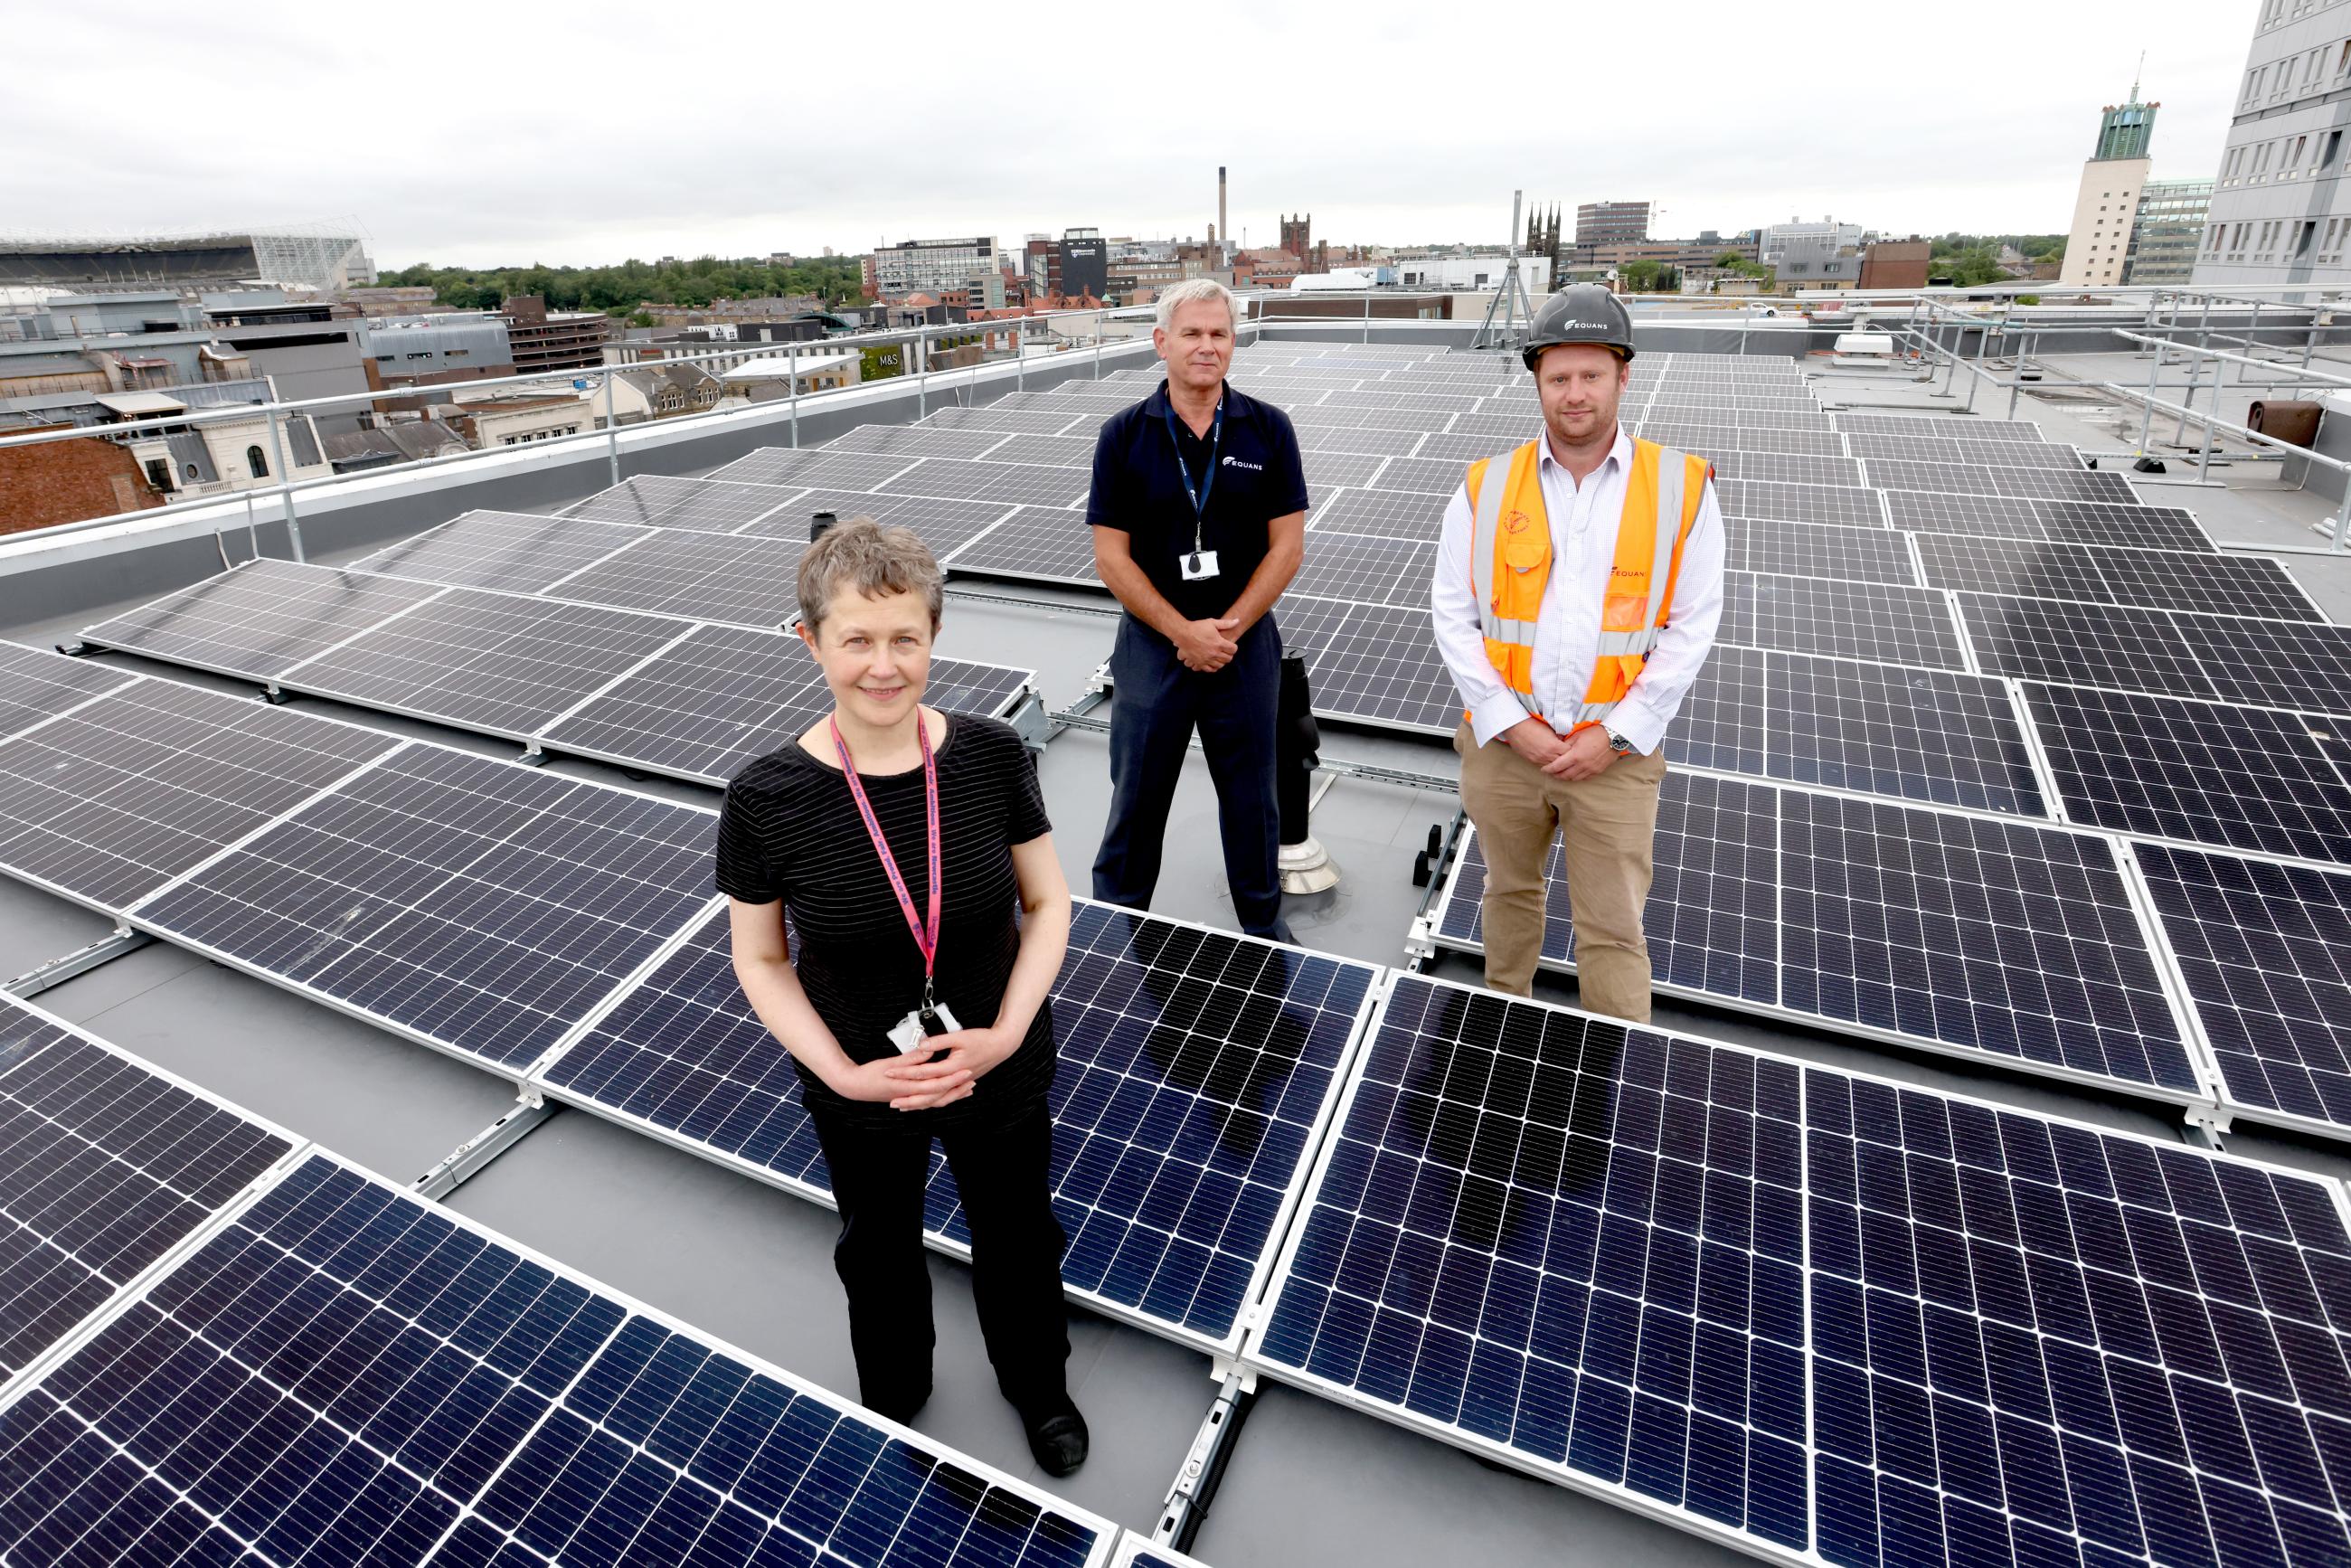 Cllr Jane Byrne, Newcastle City Council’s Connected City Cabinet member, with Tim Wood, Director of Sustainability & Innovation at EQUANS and Joe Logan, Construction Manager at EQUANS on the roof of City Library